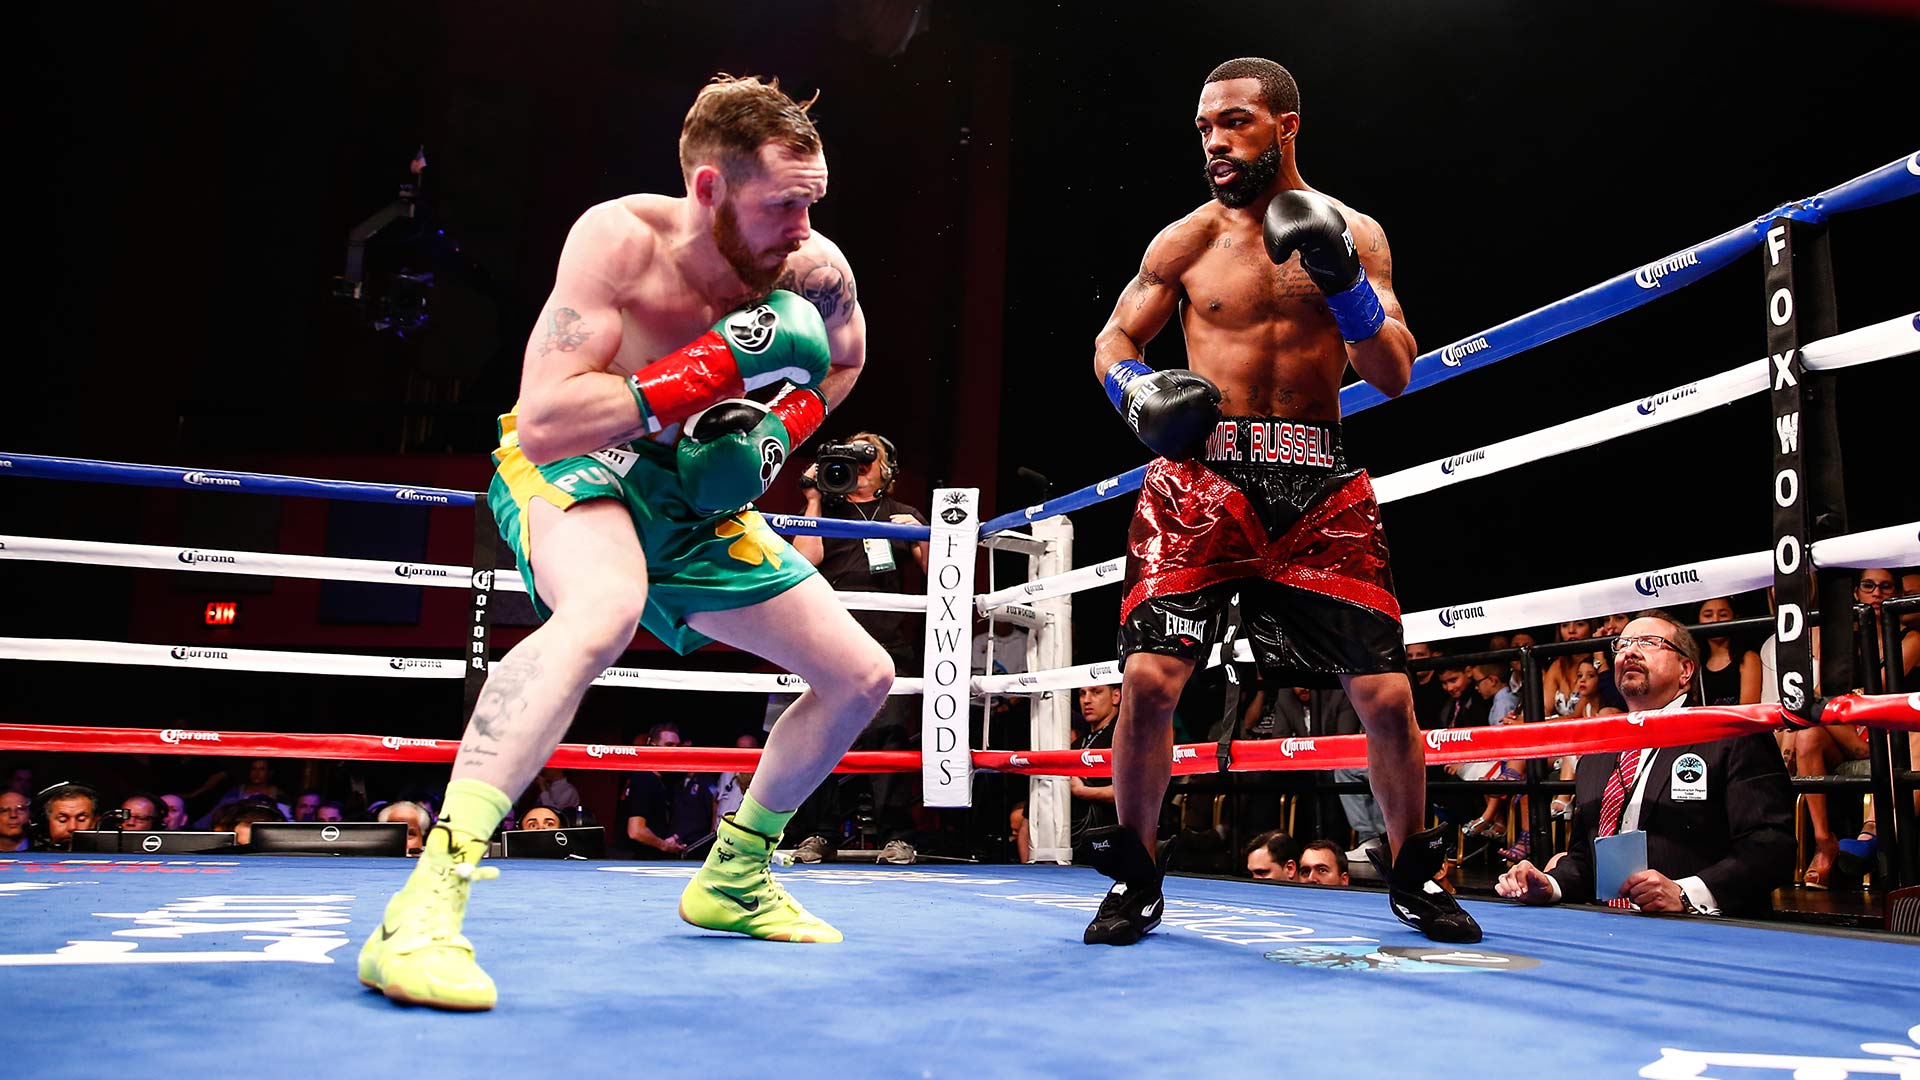 Russell vs Hyland Full Fight: April 16, 2016 - PBC on Showtime